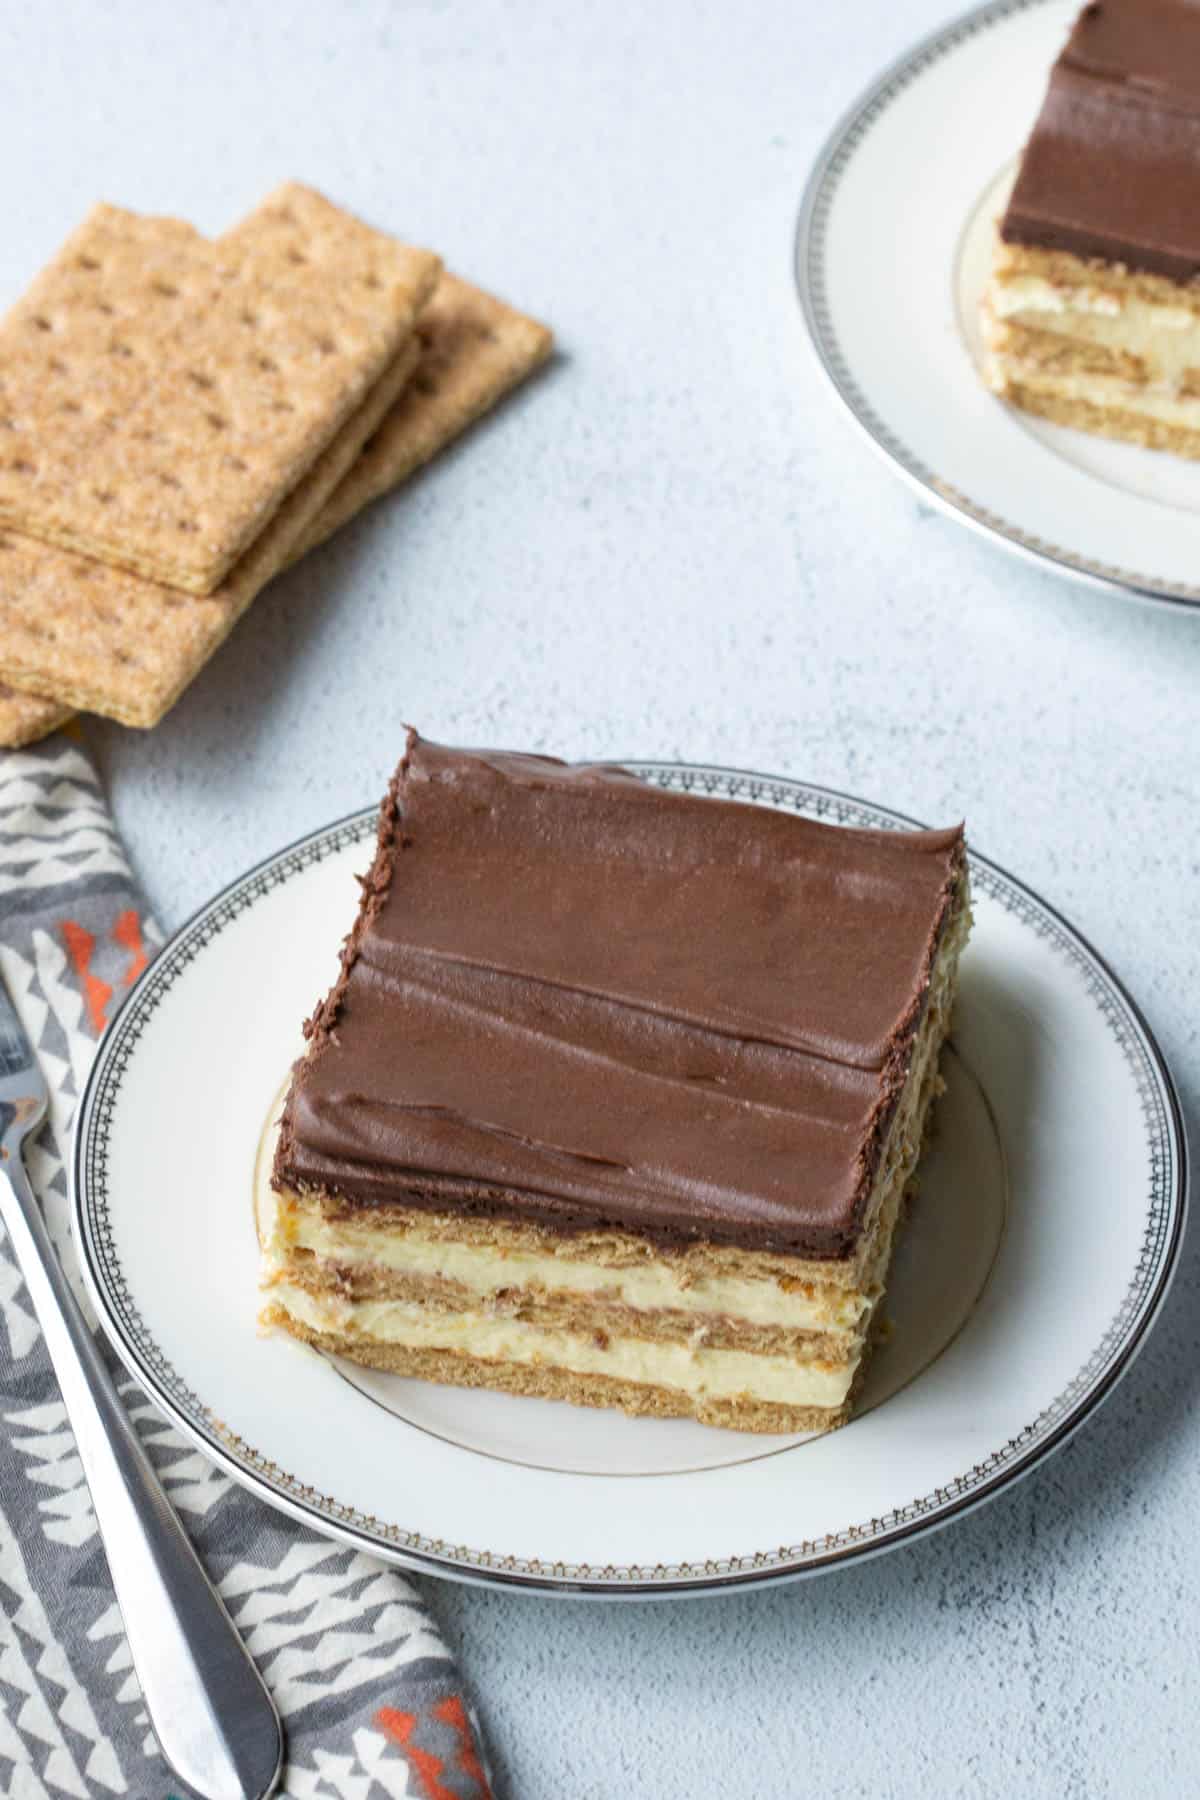 piece of chocolate eclair cake on a white plate, next to a printed napkin, a fork, and a stack of graham crackers.